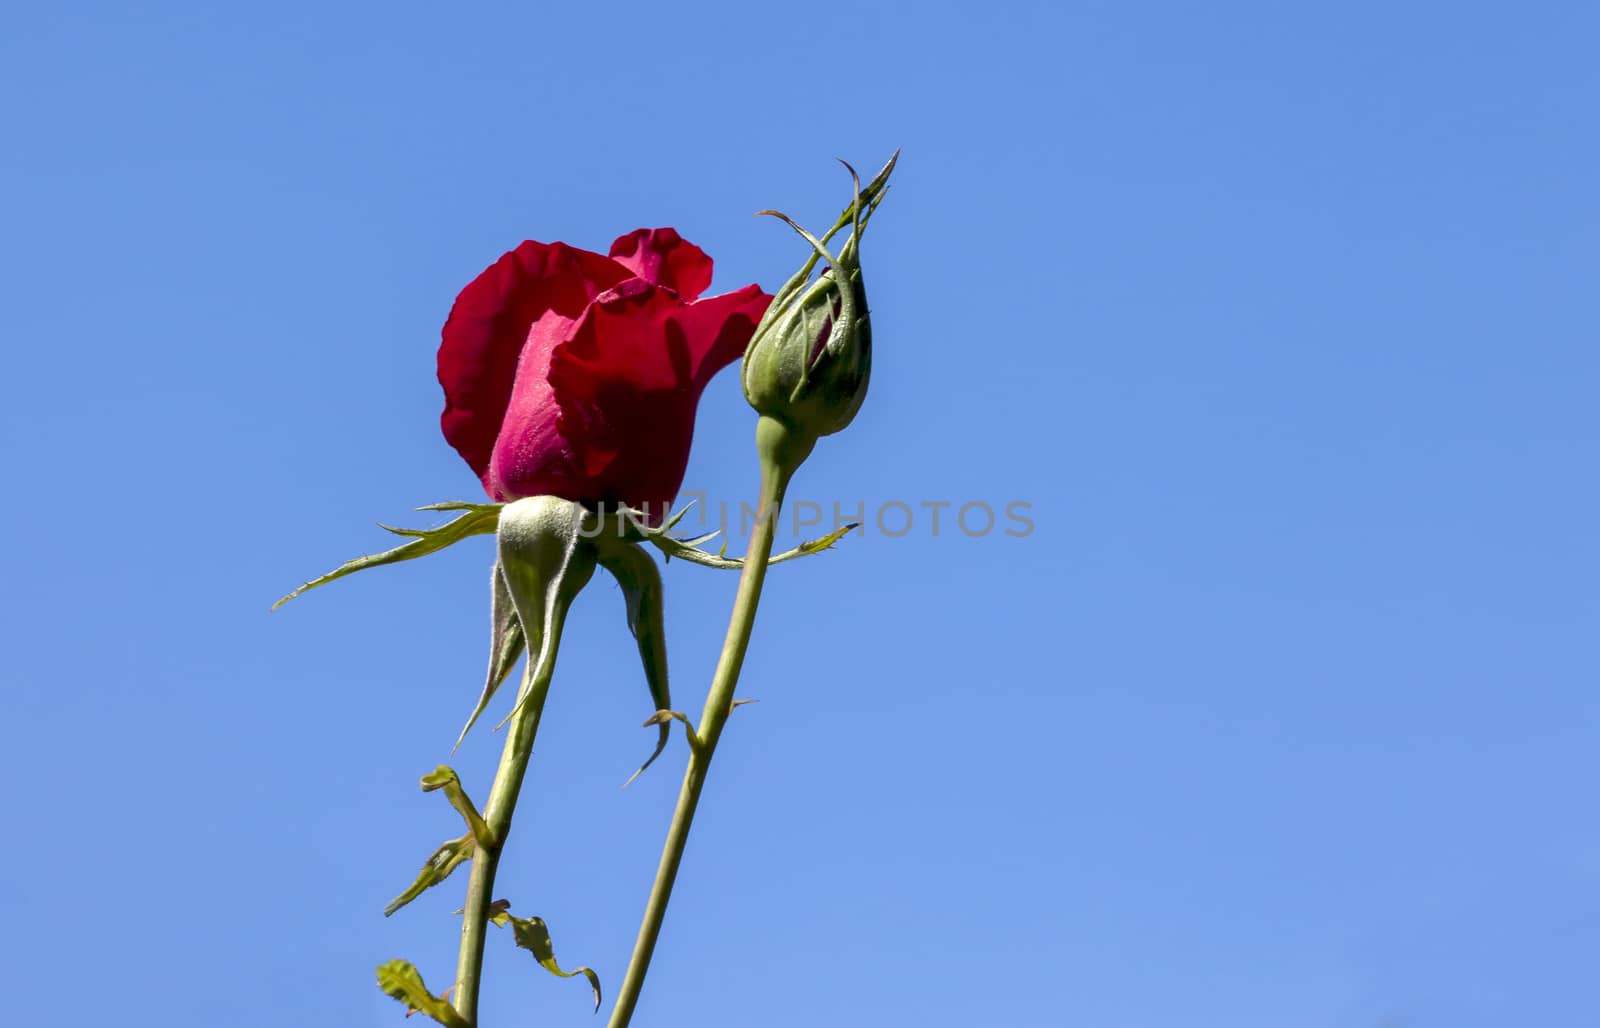 Red Roses and sky by mmarfell